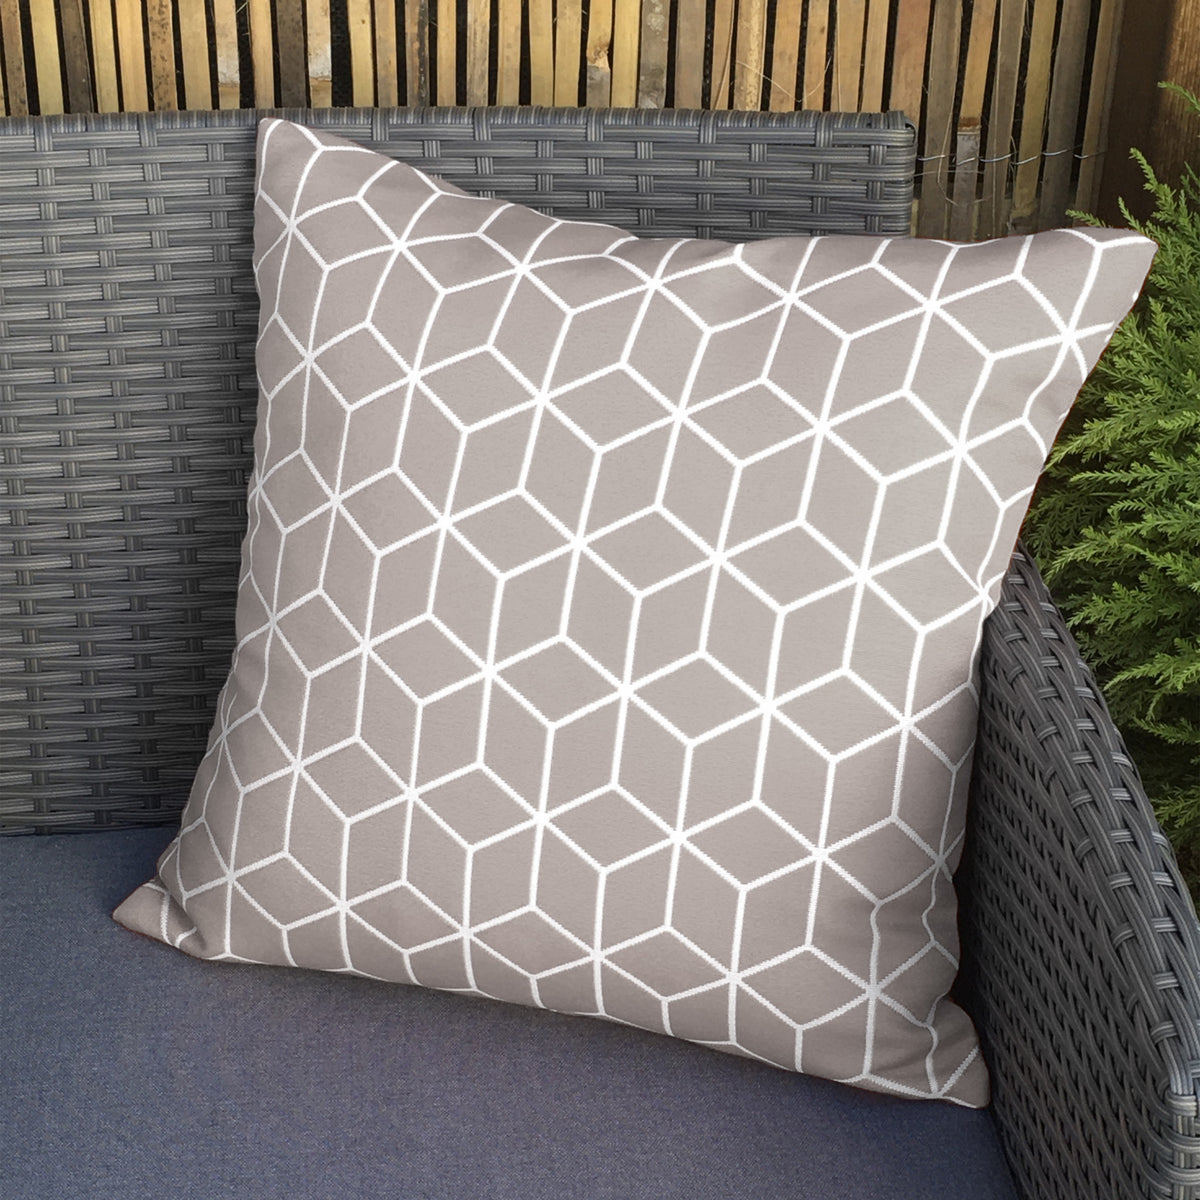 Outdoor Grey Geometric Scatter Cushion